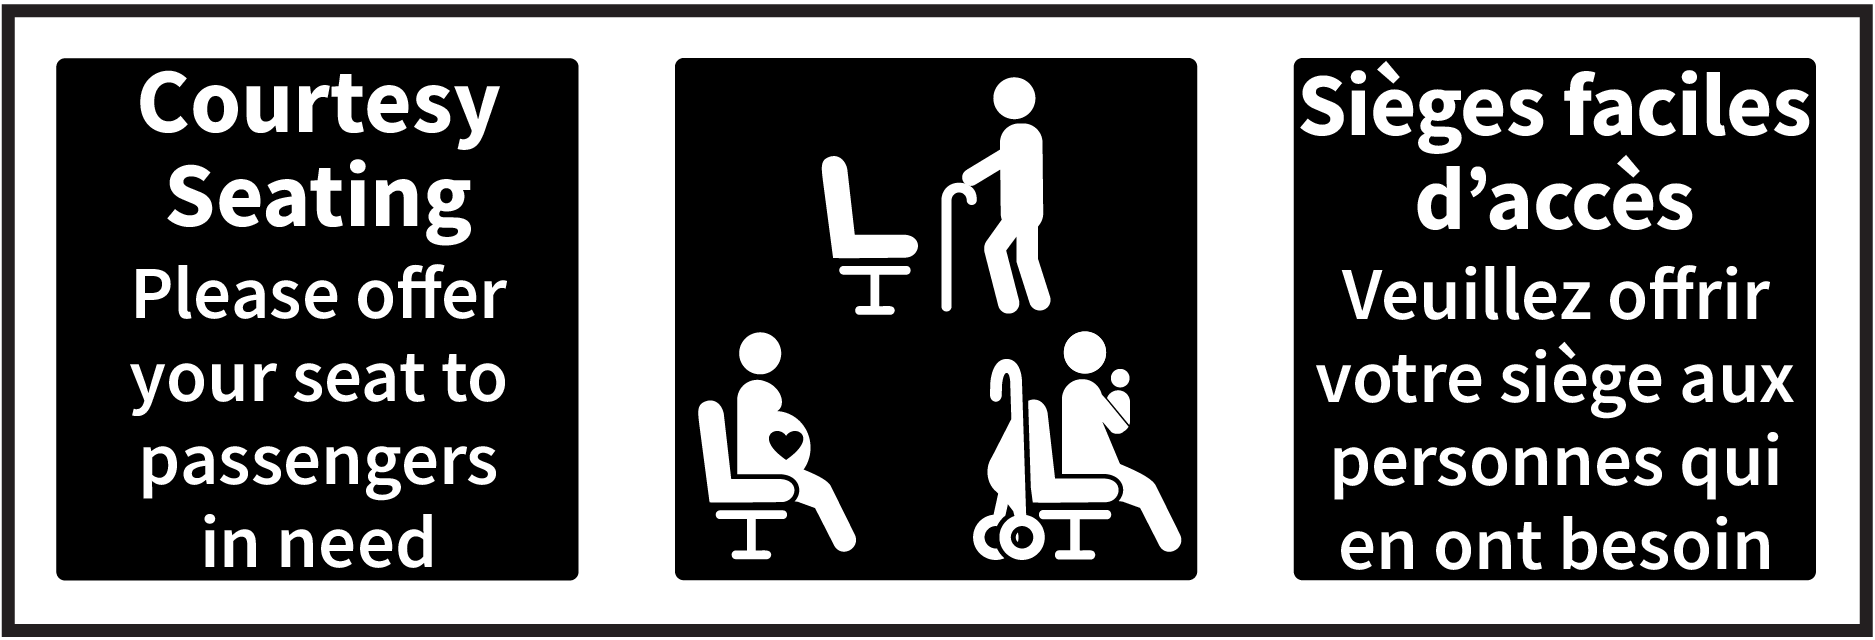 Icons of an upright standing person with a cane, a pregnant person, person with child and folded stroller, and text that reads Courtesy Seating Area - Please offer your seat to passengers in need.